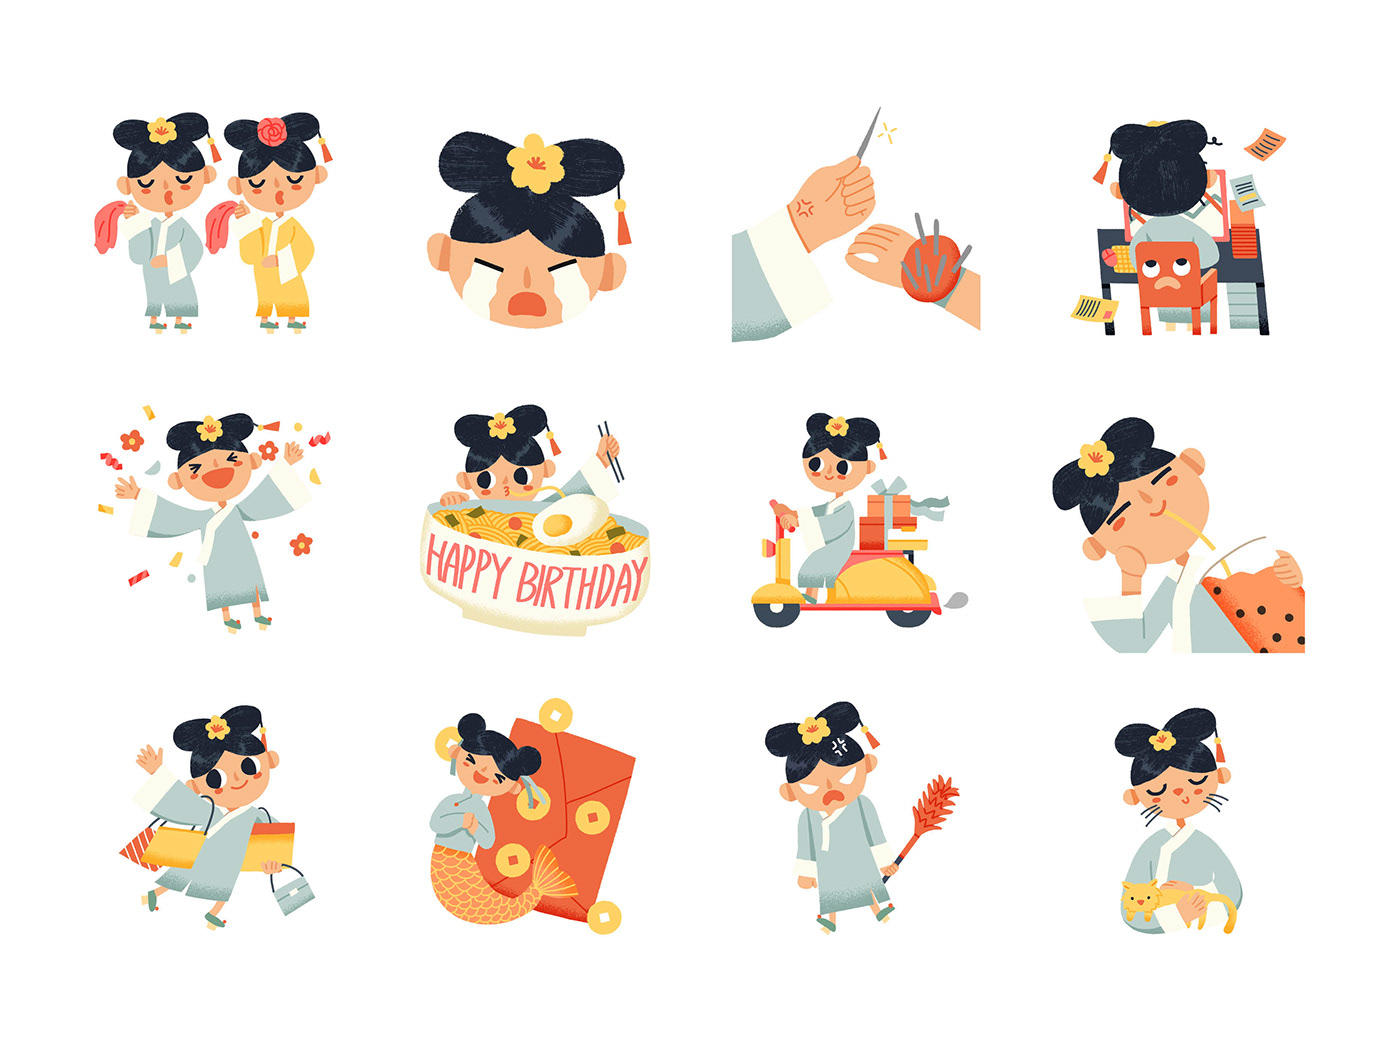 google stickers Princess china Chinese culture busy soap opera status + activities shanghai